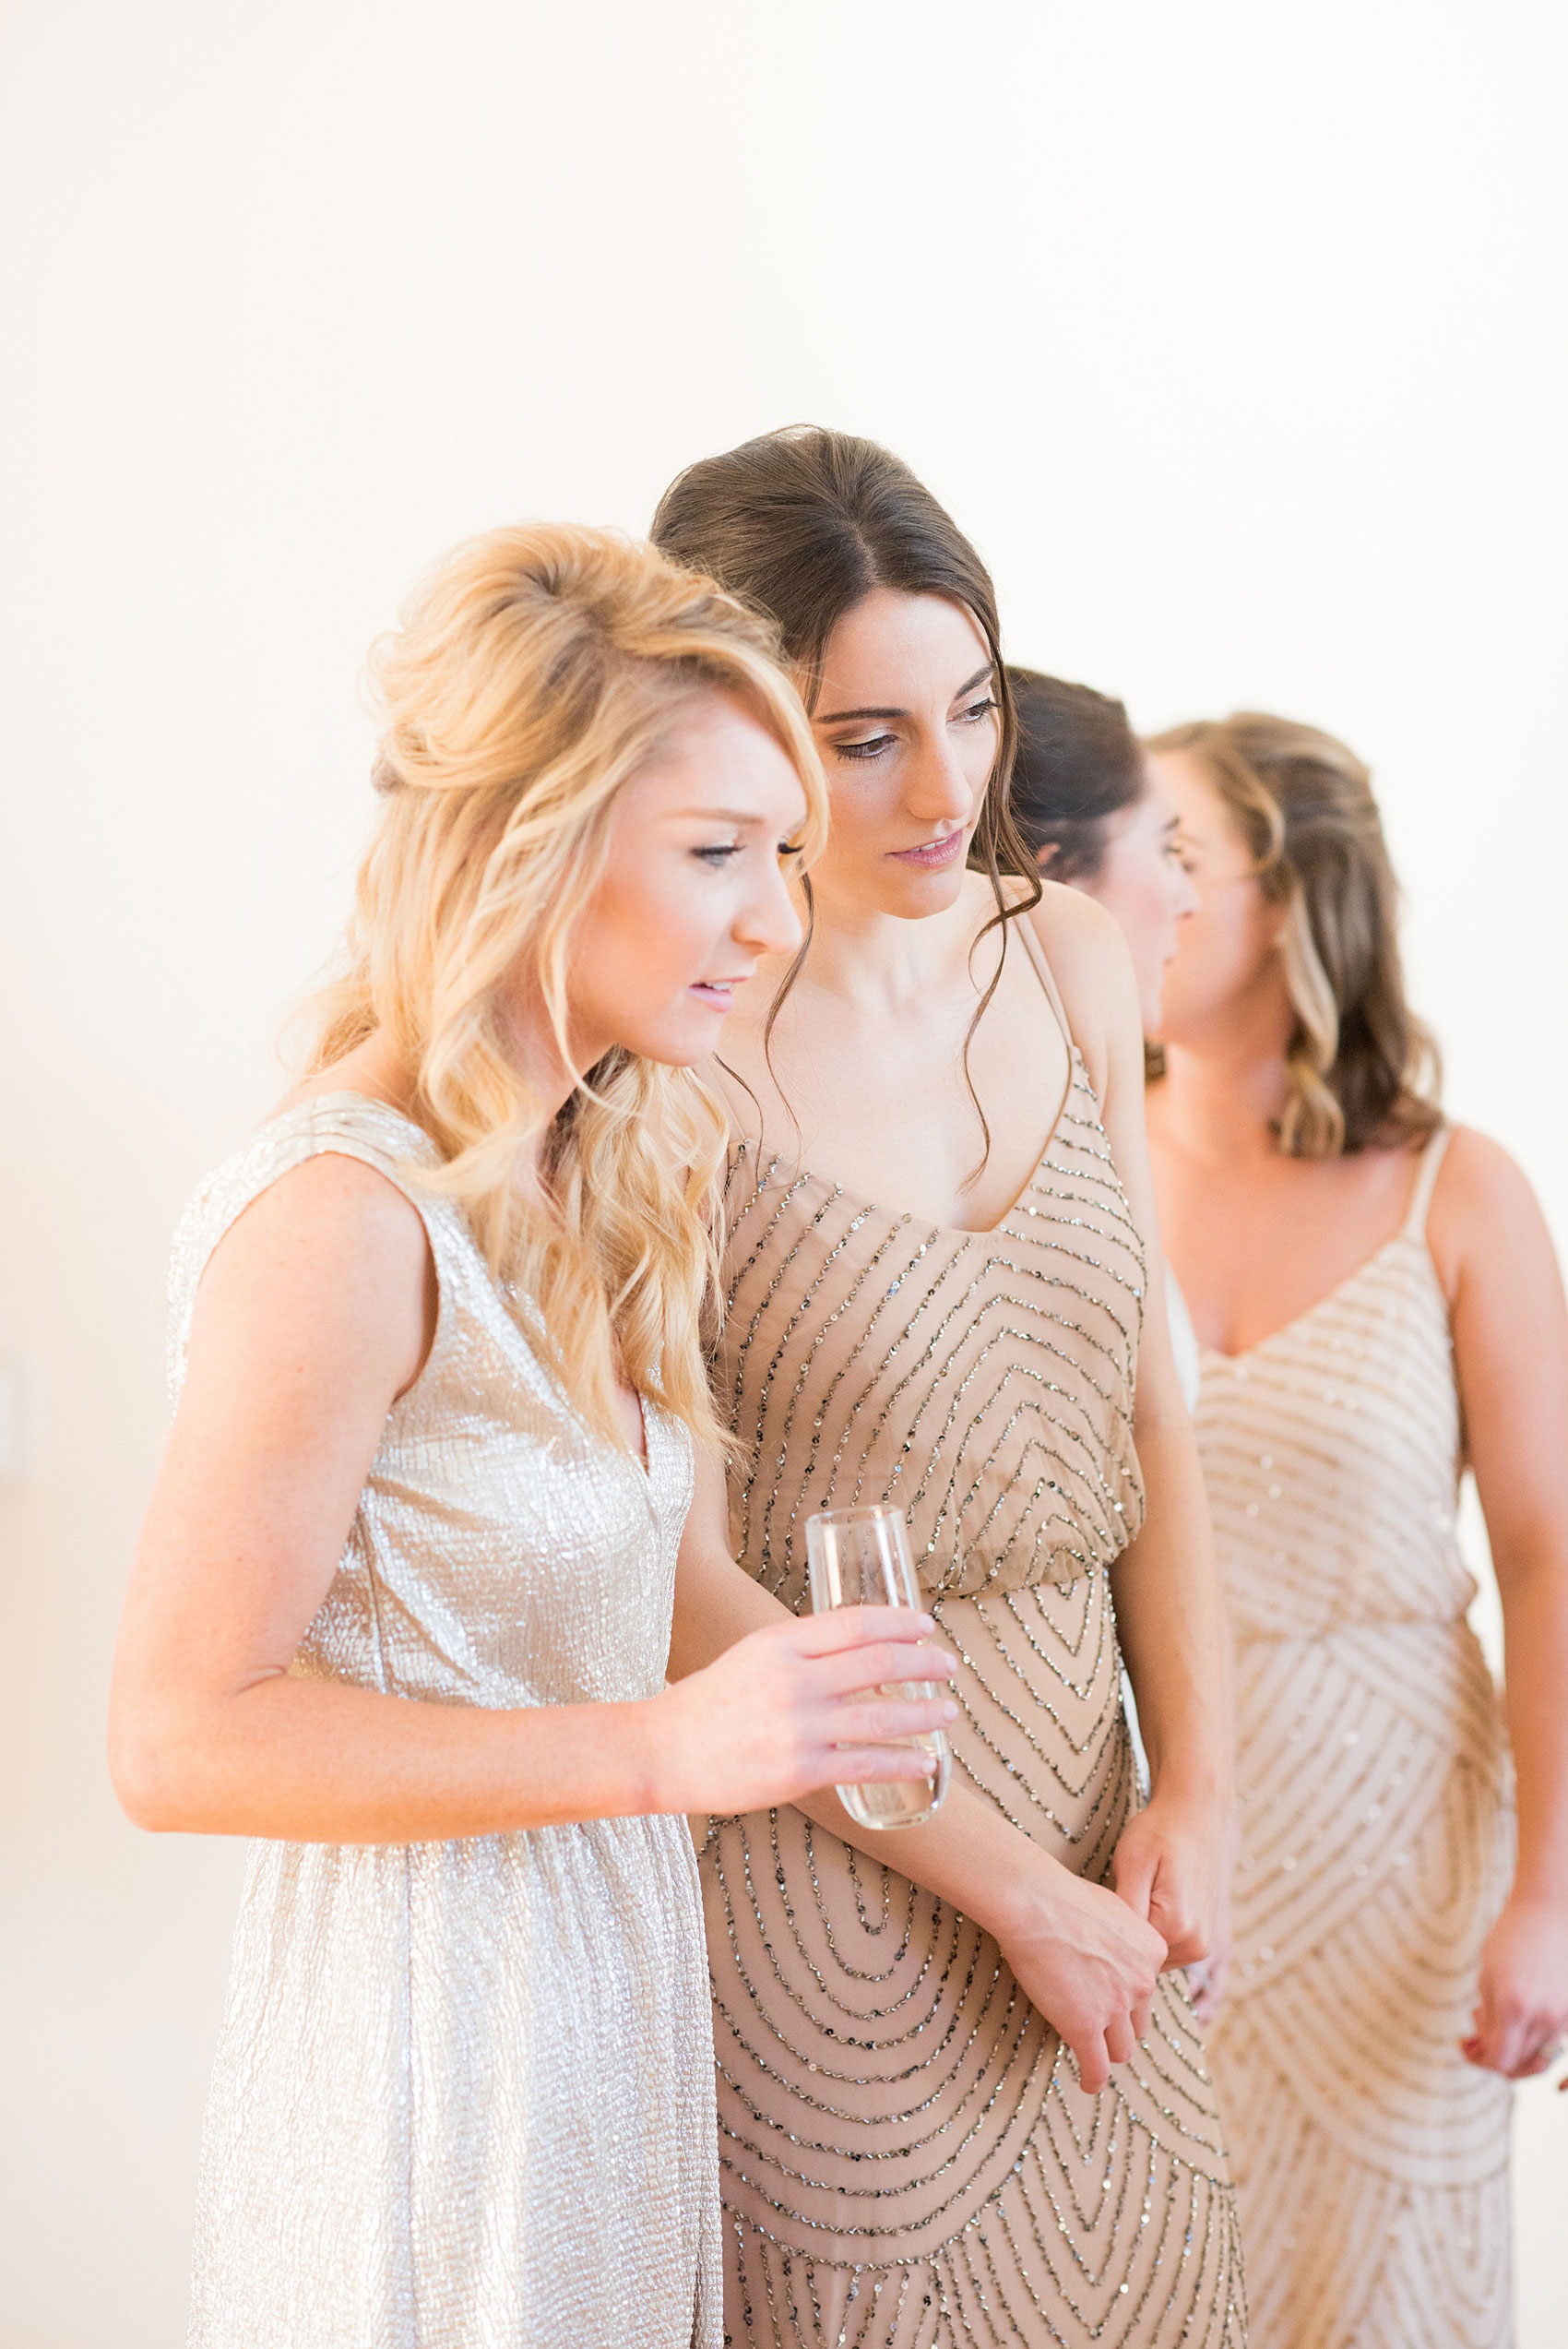 Pictures from a Christmas inspired wedding in downtown Raleigh, North Carolina by Mikkel Paige Photography. The bride and bridesmaids got ready for the church ceremony and reception at The Stockroom at 230, at The Glass Box in mismatched pink dresses. Click through for more ideas from a beautiful celebration, including decor photos in a green and gold decor palette. #mikkelpaige #raleighweddingphotographer #downtownRaleigh #greenandgoldwedding #gettingready #christmaswedding #bridesmaids #bridal